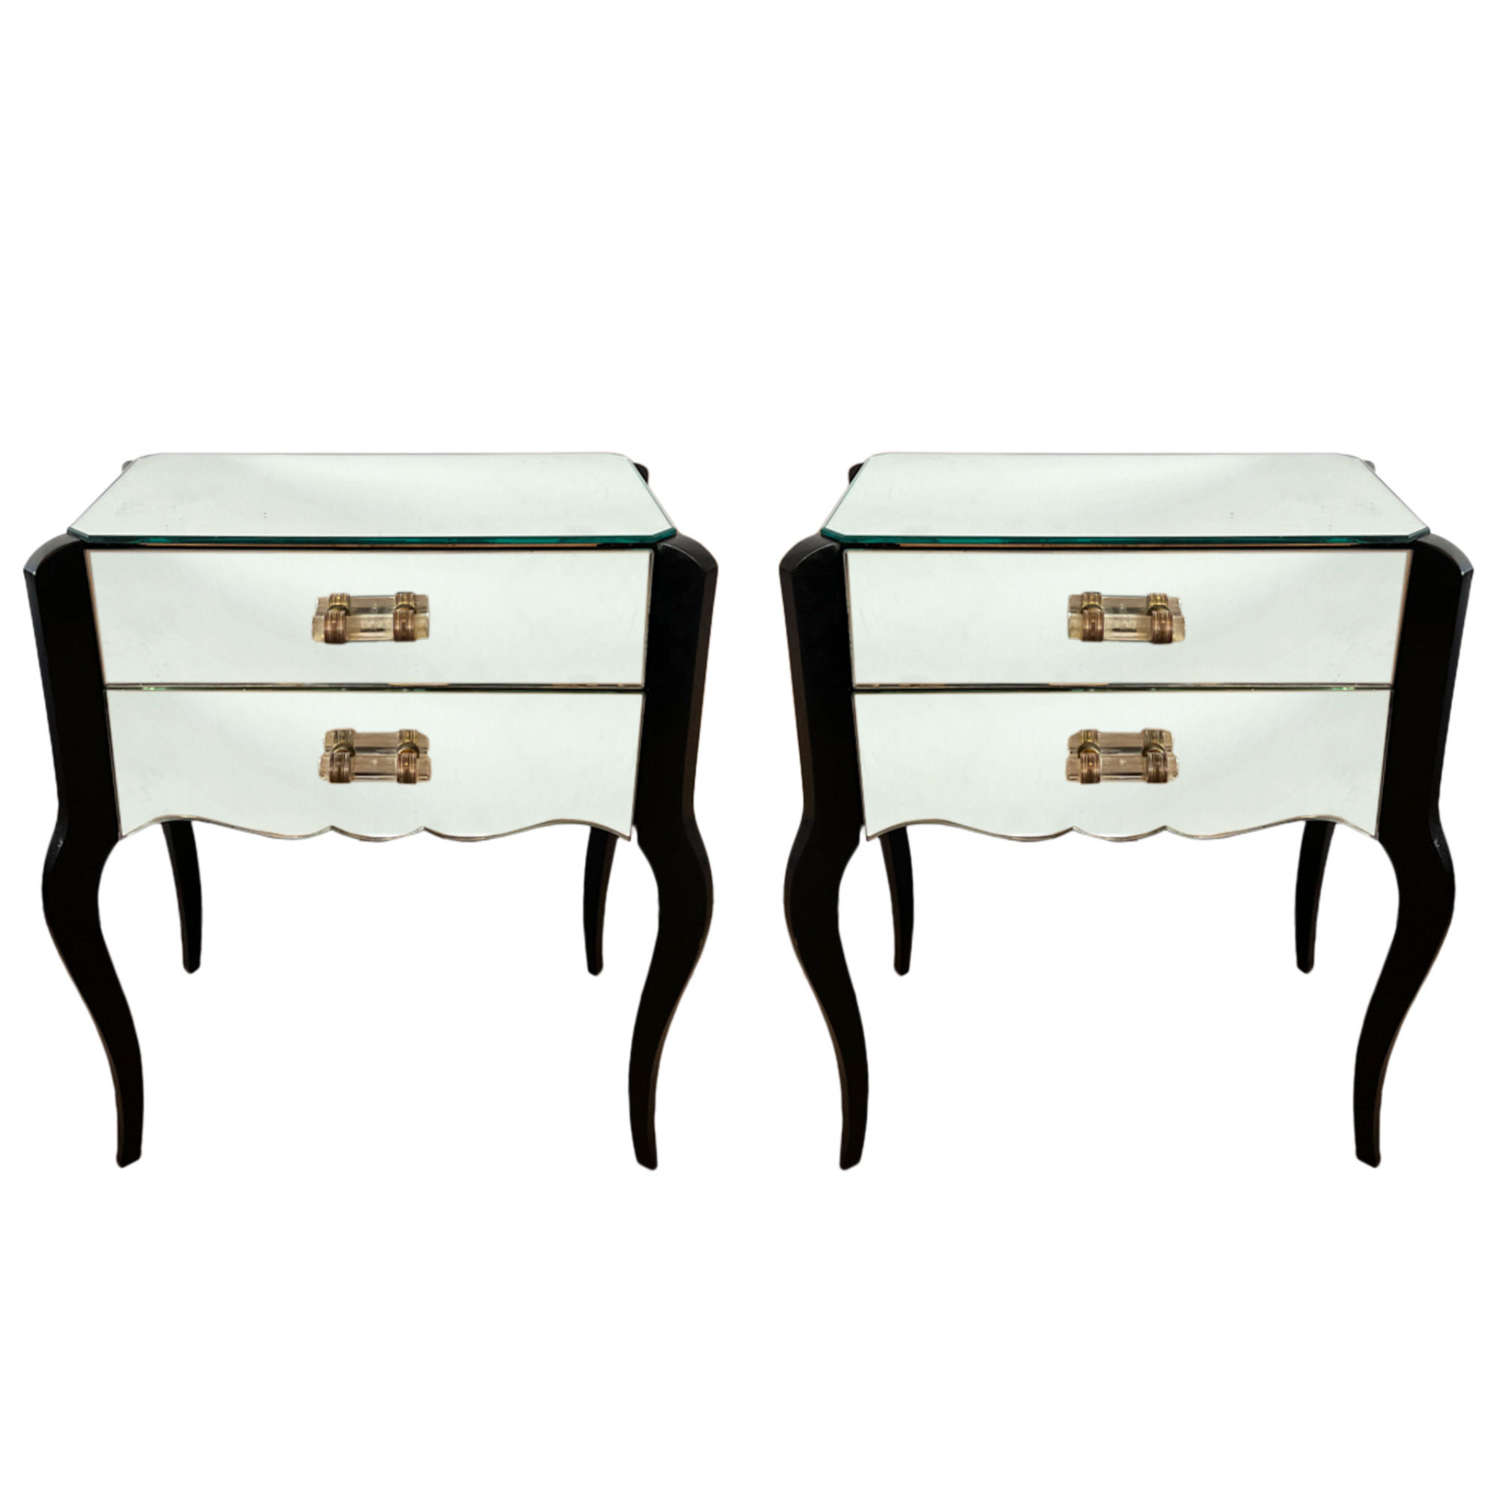 Pair of French 1960s Mirrored Nightstands